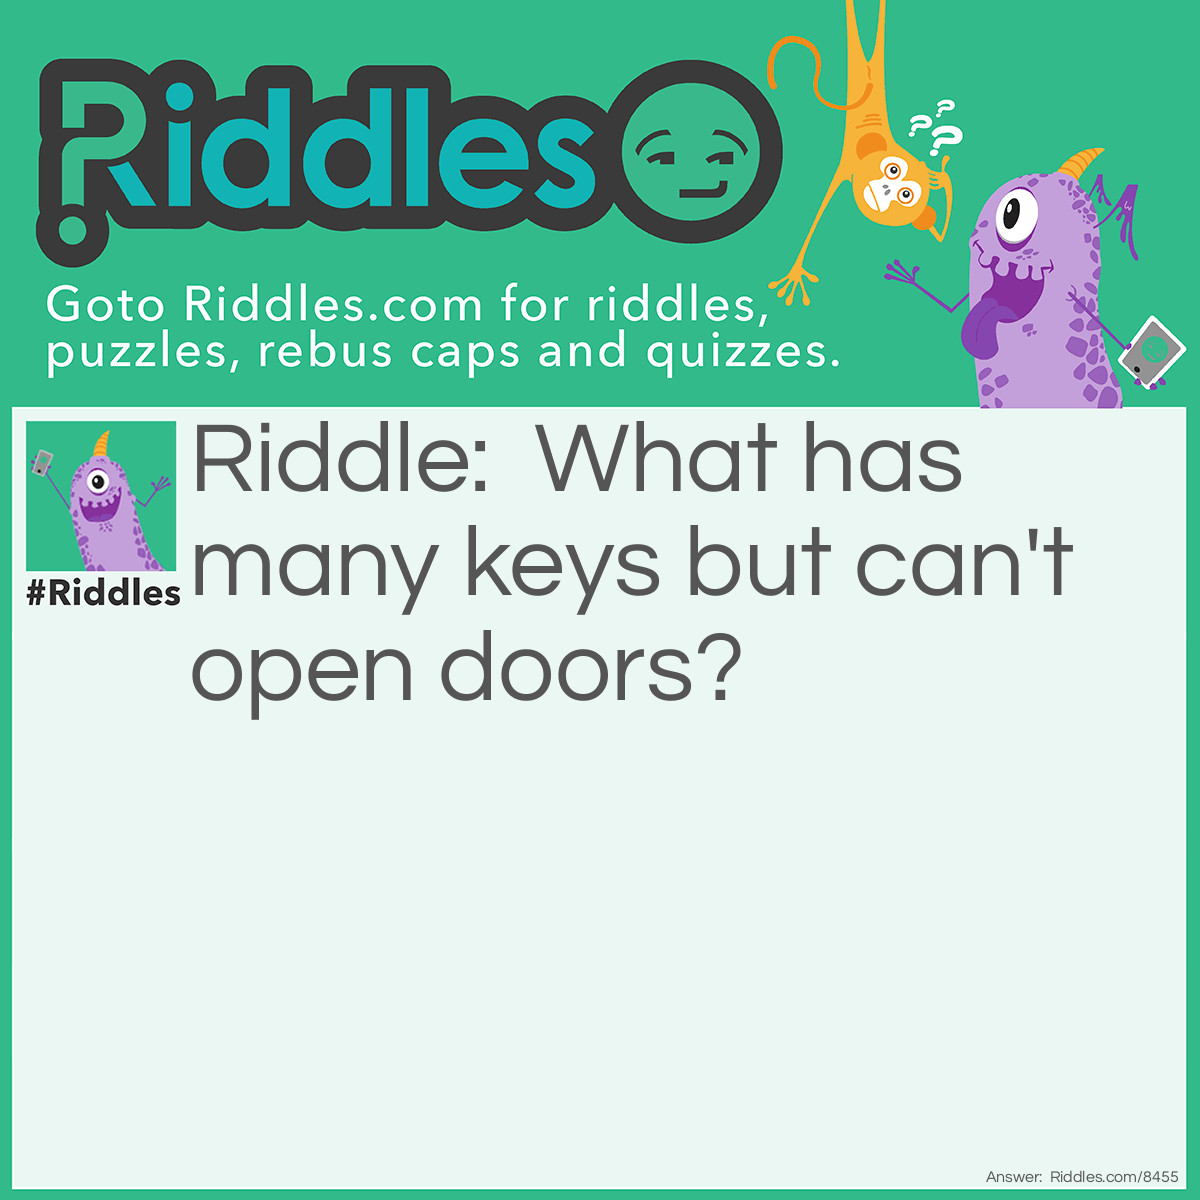 Riddle: What has many keys but can't open doors? Answer: A piano.